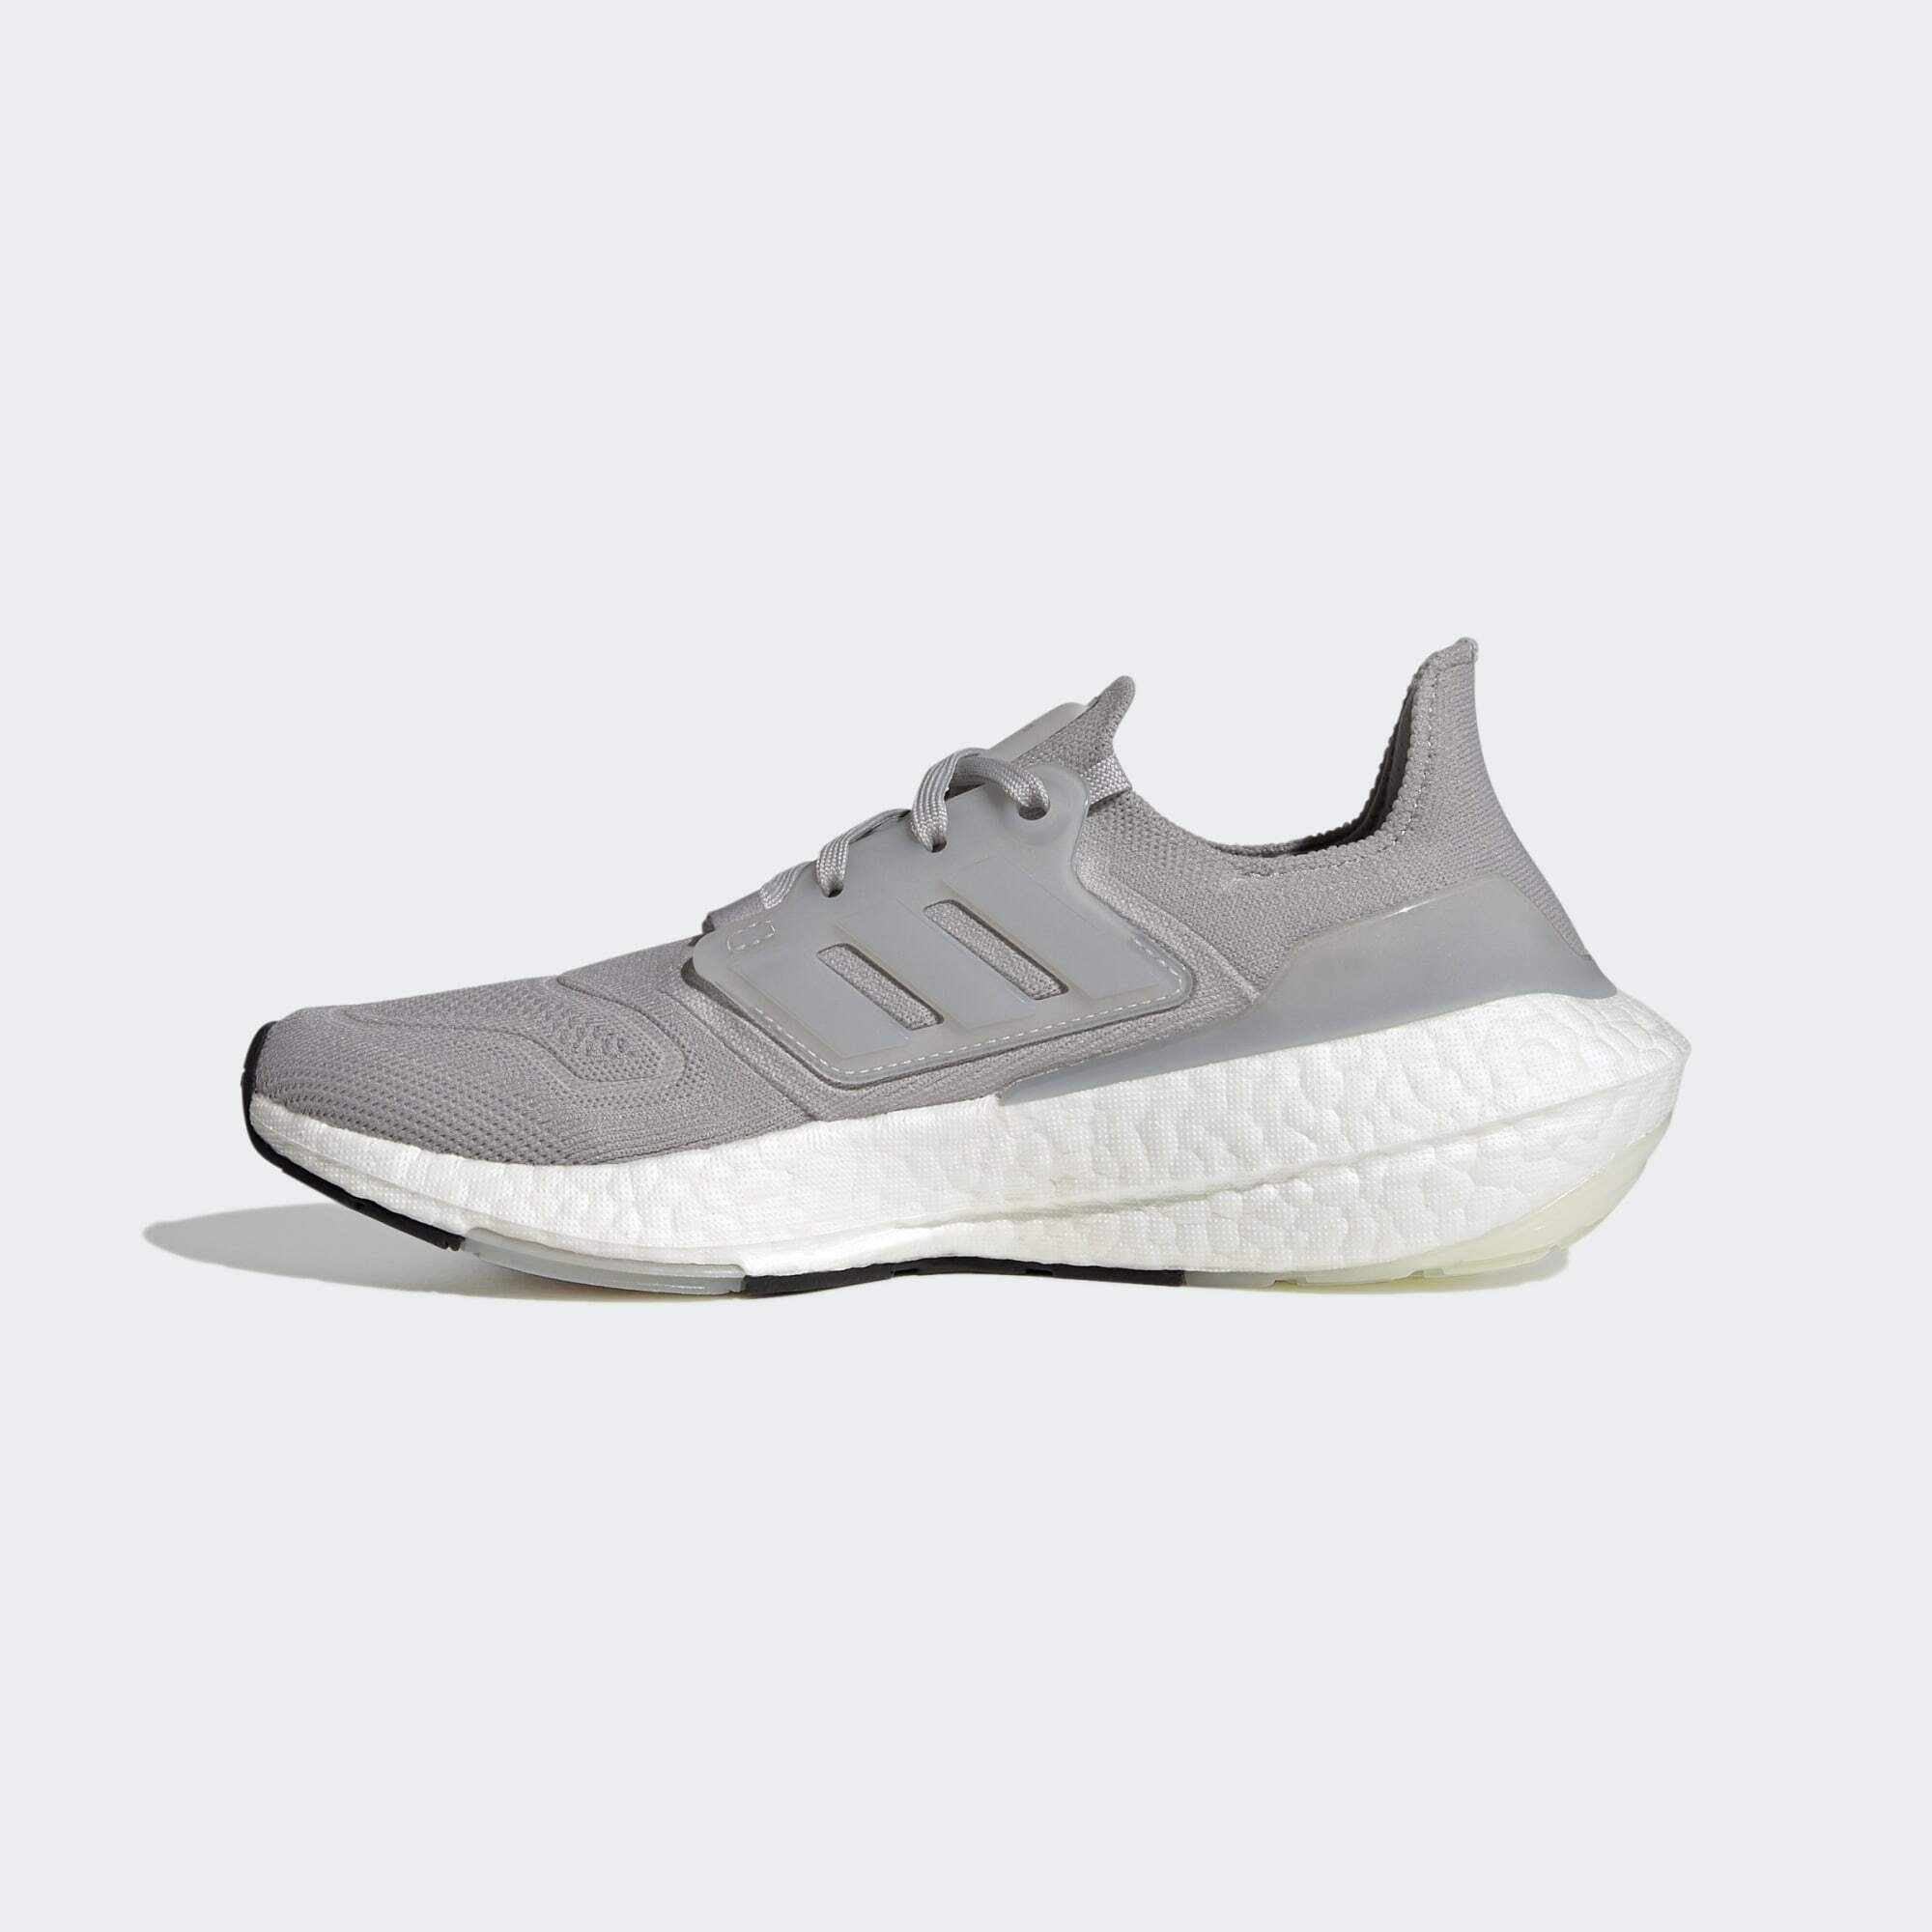 22 ULTRABOOST Grey Two / Sneaker adidas / Two LAUFSCHUH Grey Two Grey Performance